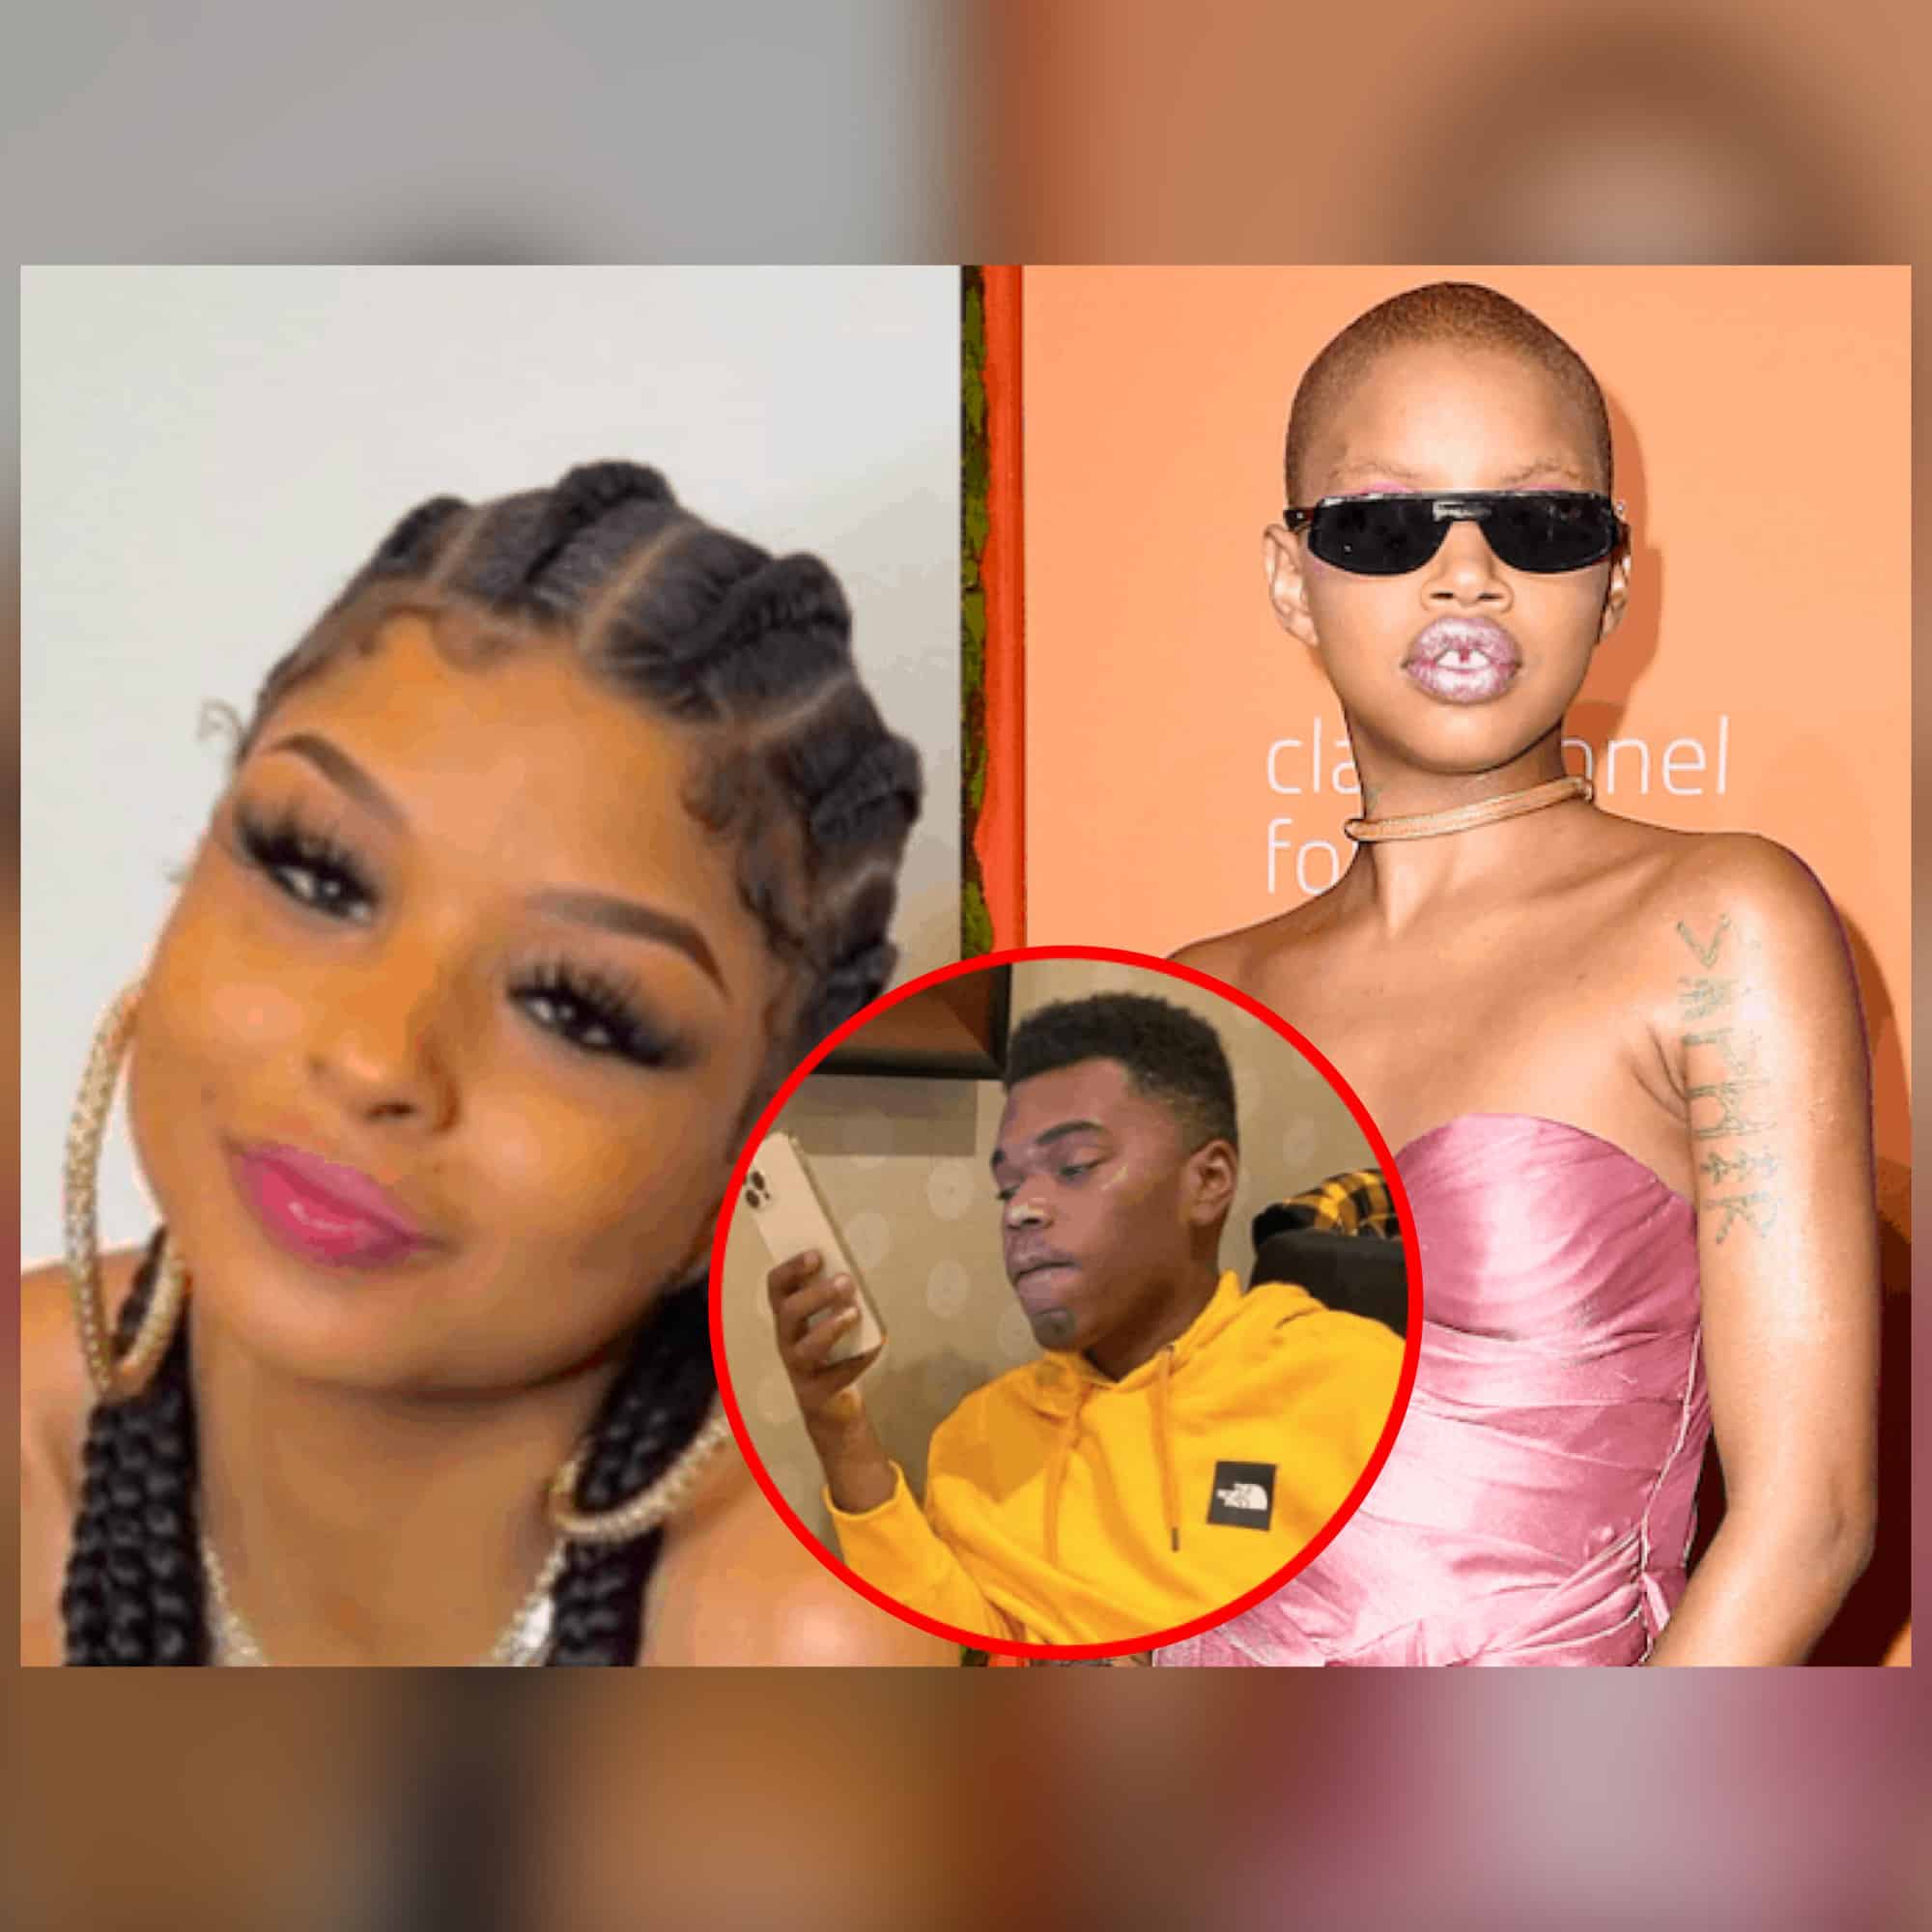 Rolling Ray Gives His Thoughts On The Recent Drama Between Slick Woods & Chrisean Rock—“Slick Woods Too Bald-Headed To Be Playing So Much”